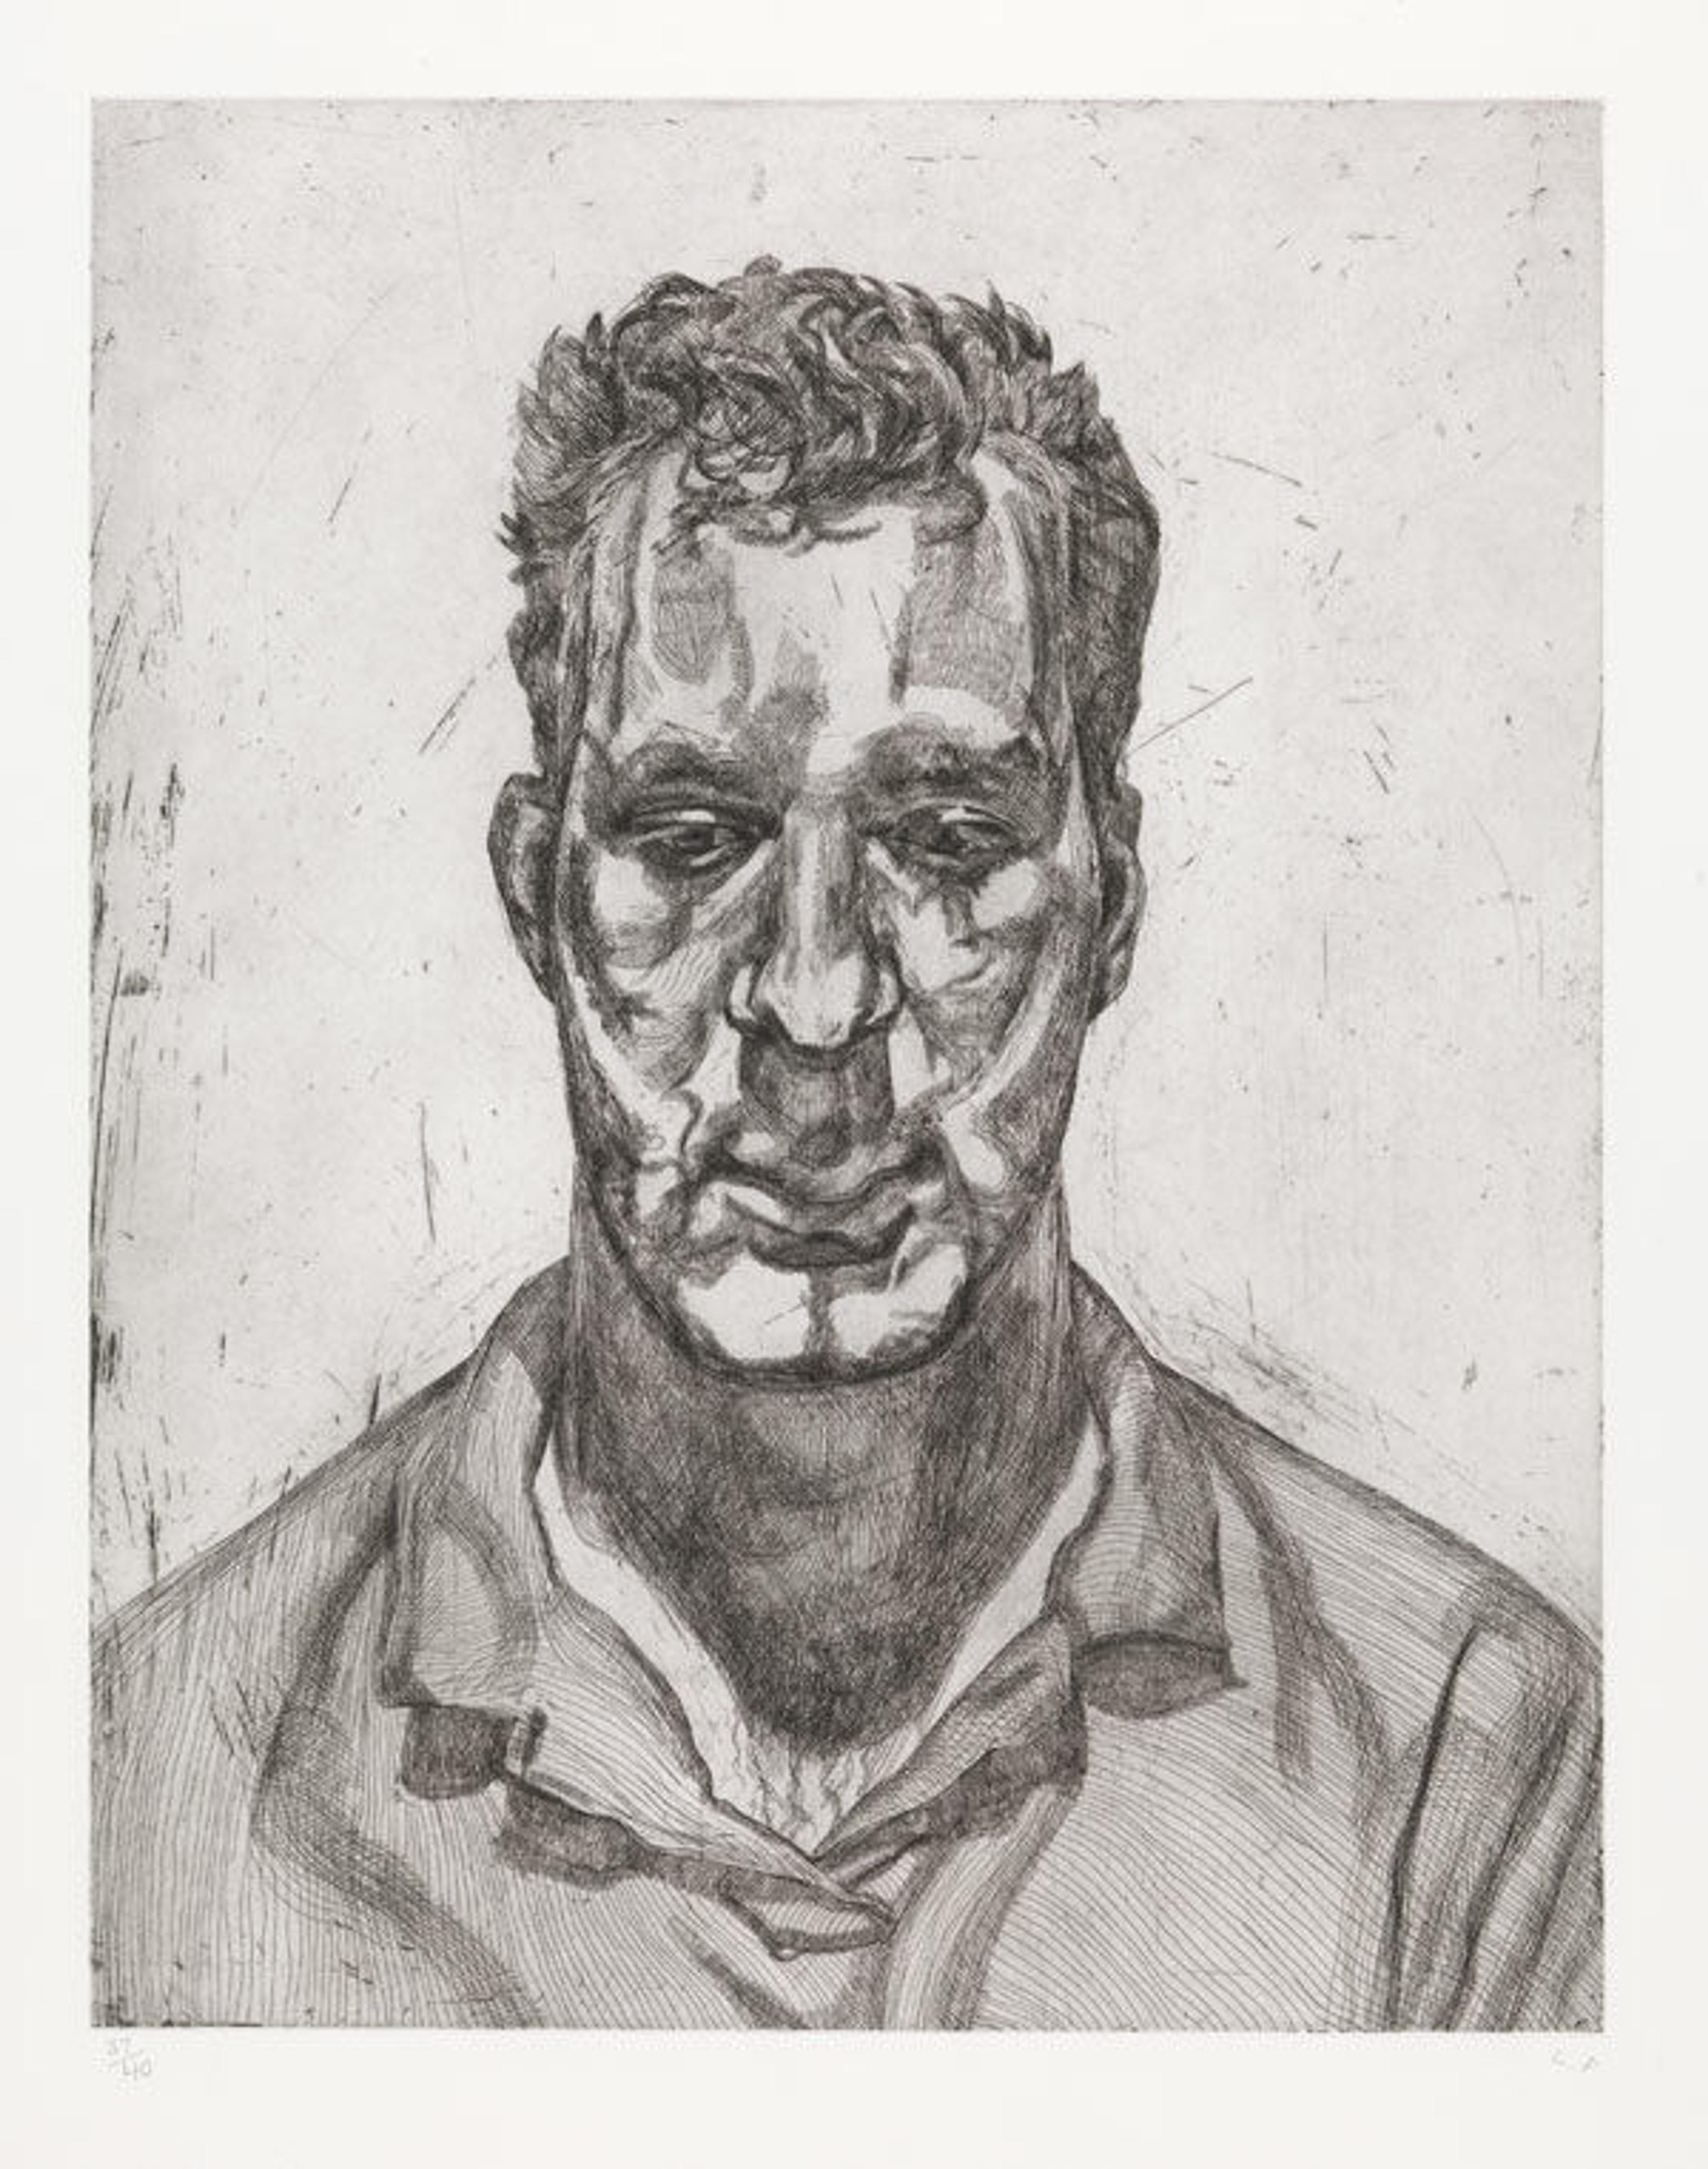 Lucian Freud, (British [born Germany], 1922–2011). Kai, 1991–92. Etching; plate: 27 1/2 x 21 5/8 in. (69.9 x 54.9 cm), Sheet: 31 1/8 x 25 in. (79.1 x 63.5 cm). The Metropolitan Museum of Art, New York, Bequest of William S. Lieberman, 2005 (2007.49.590)